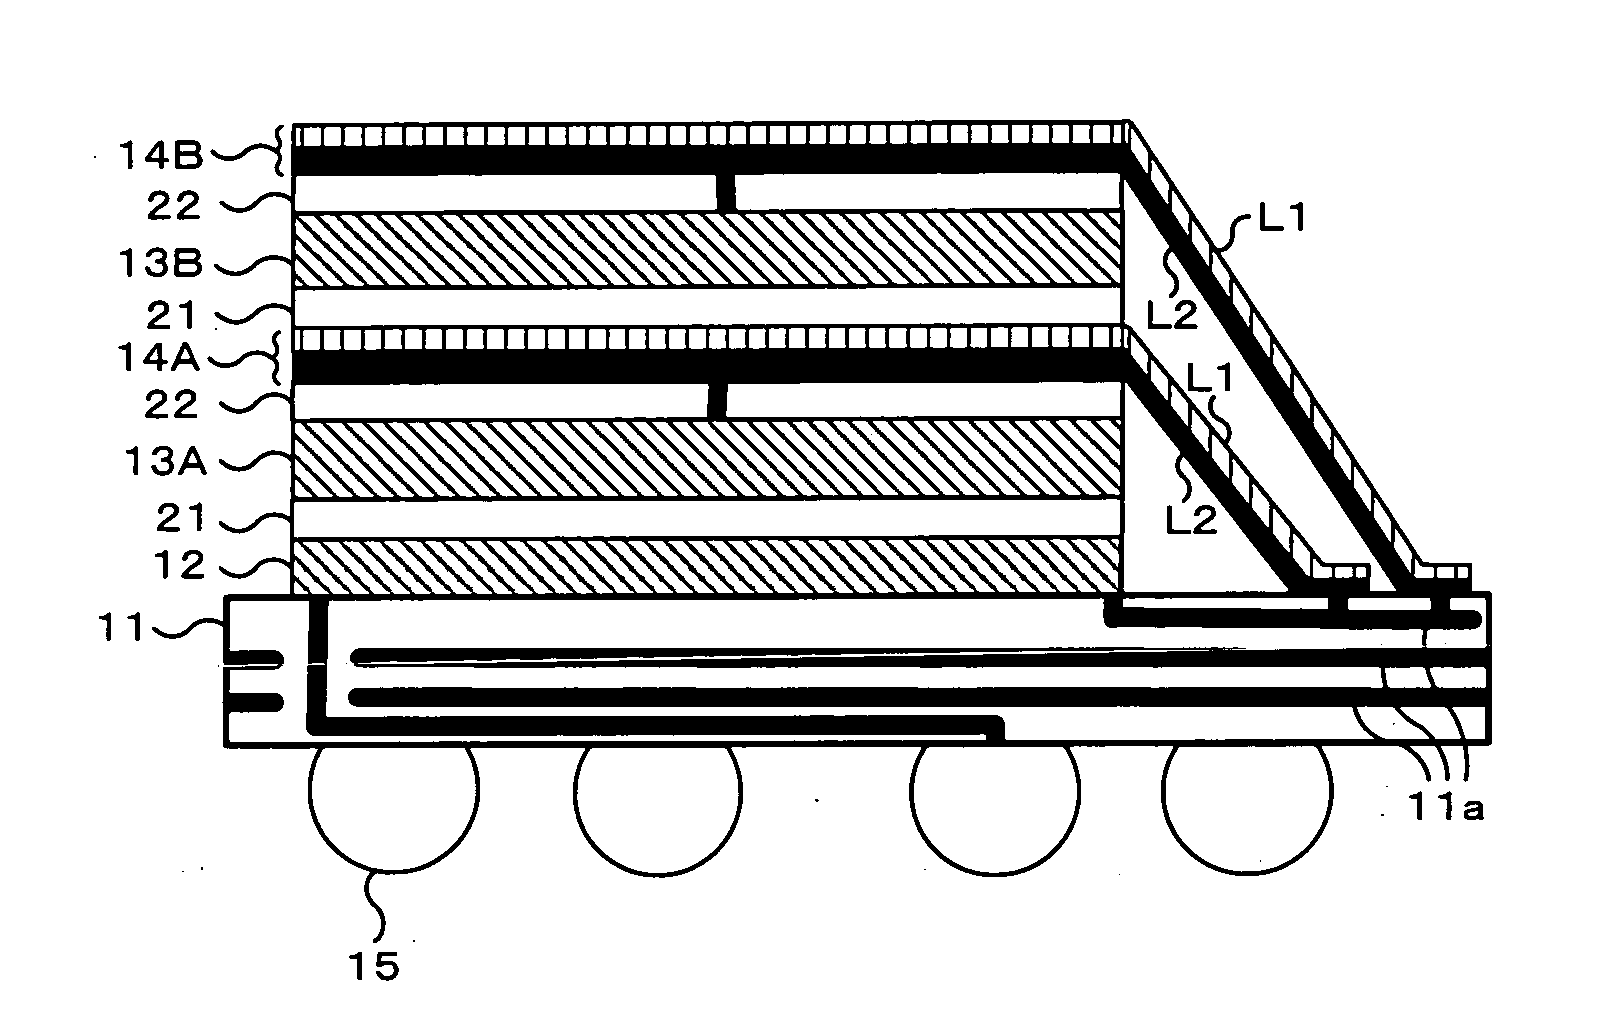 Stacked type semiconductor device